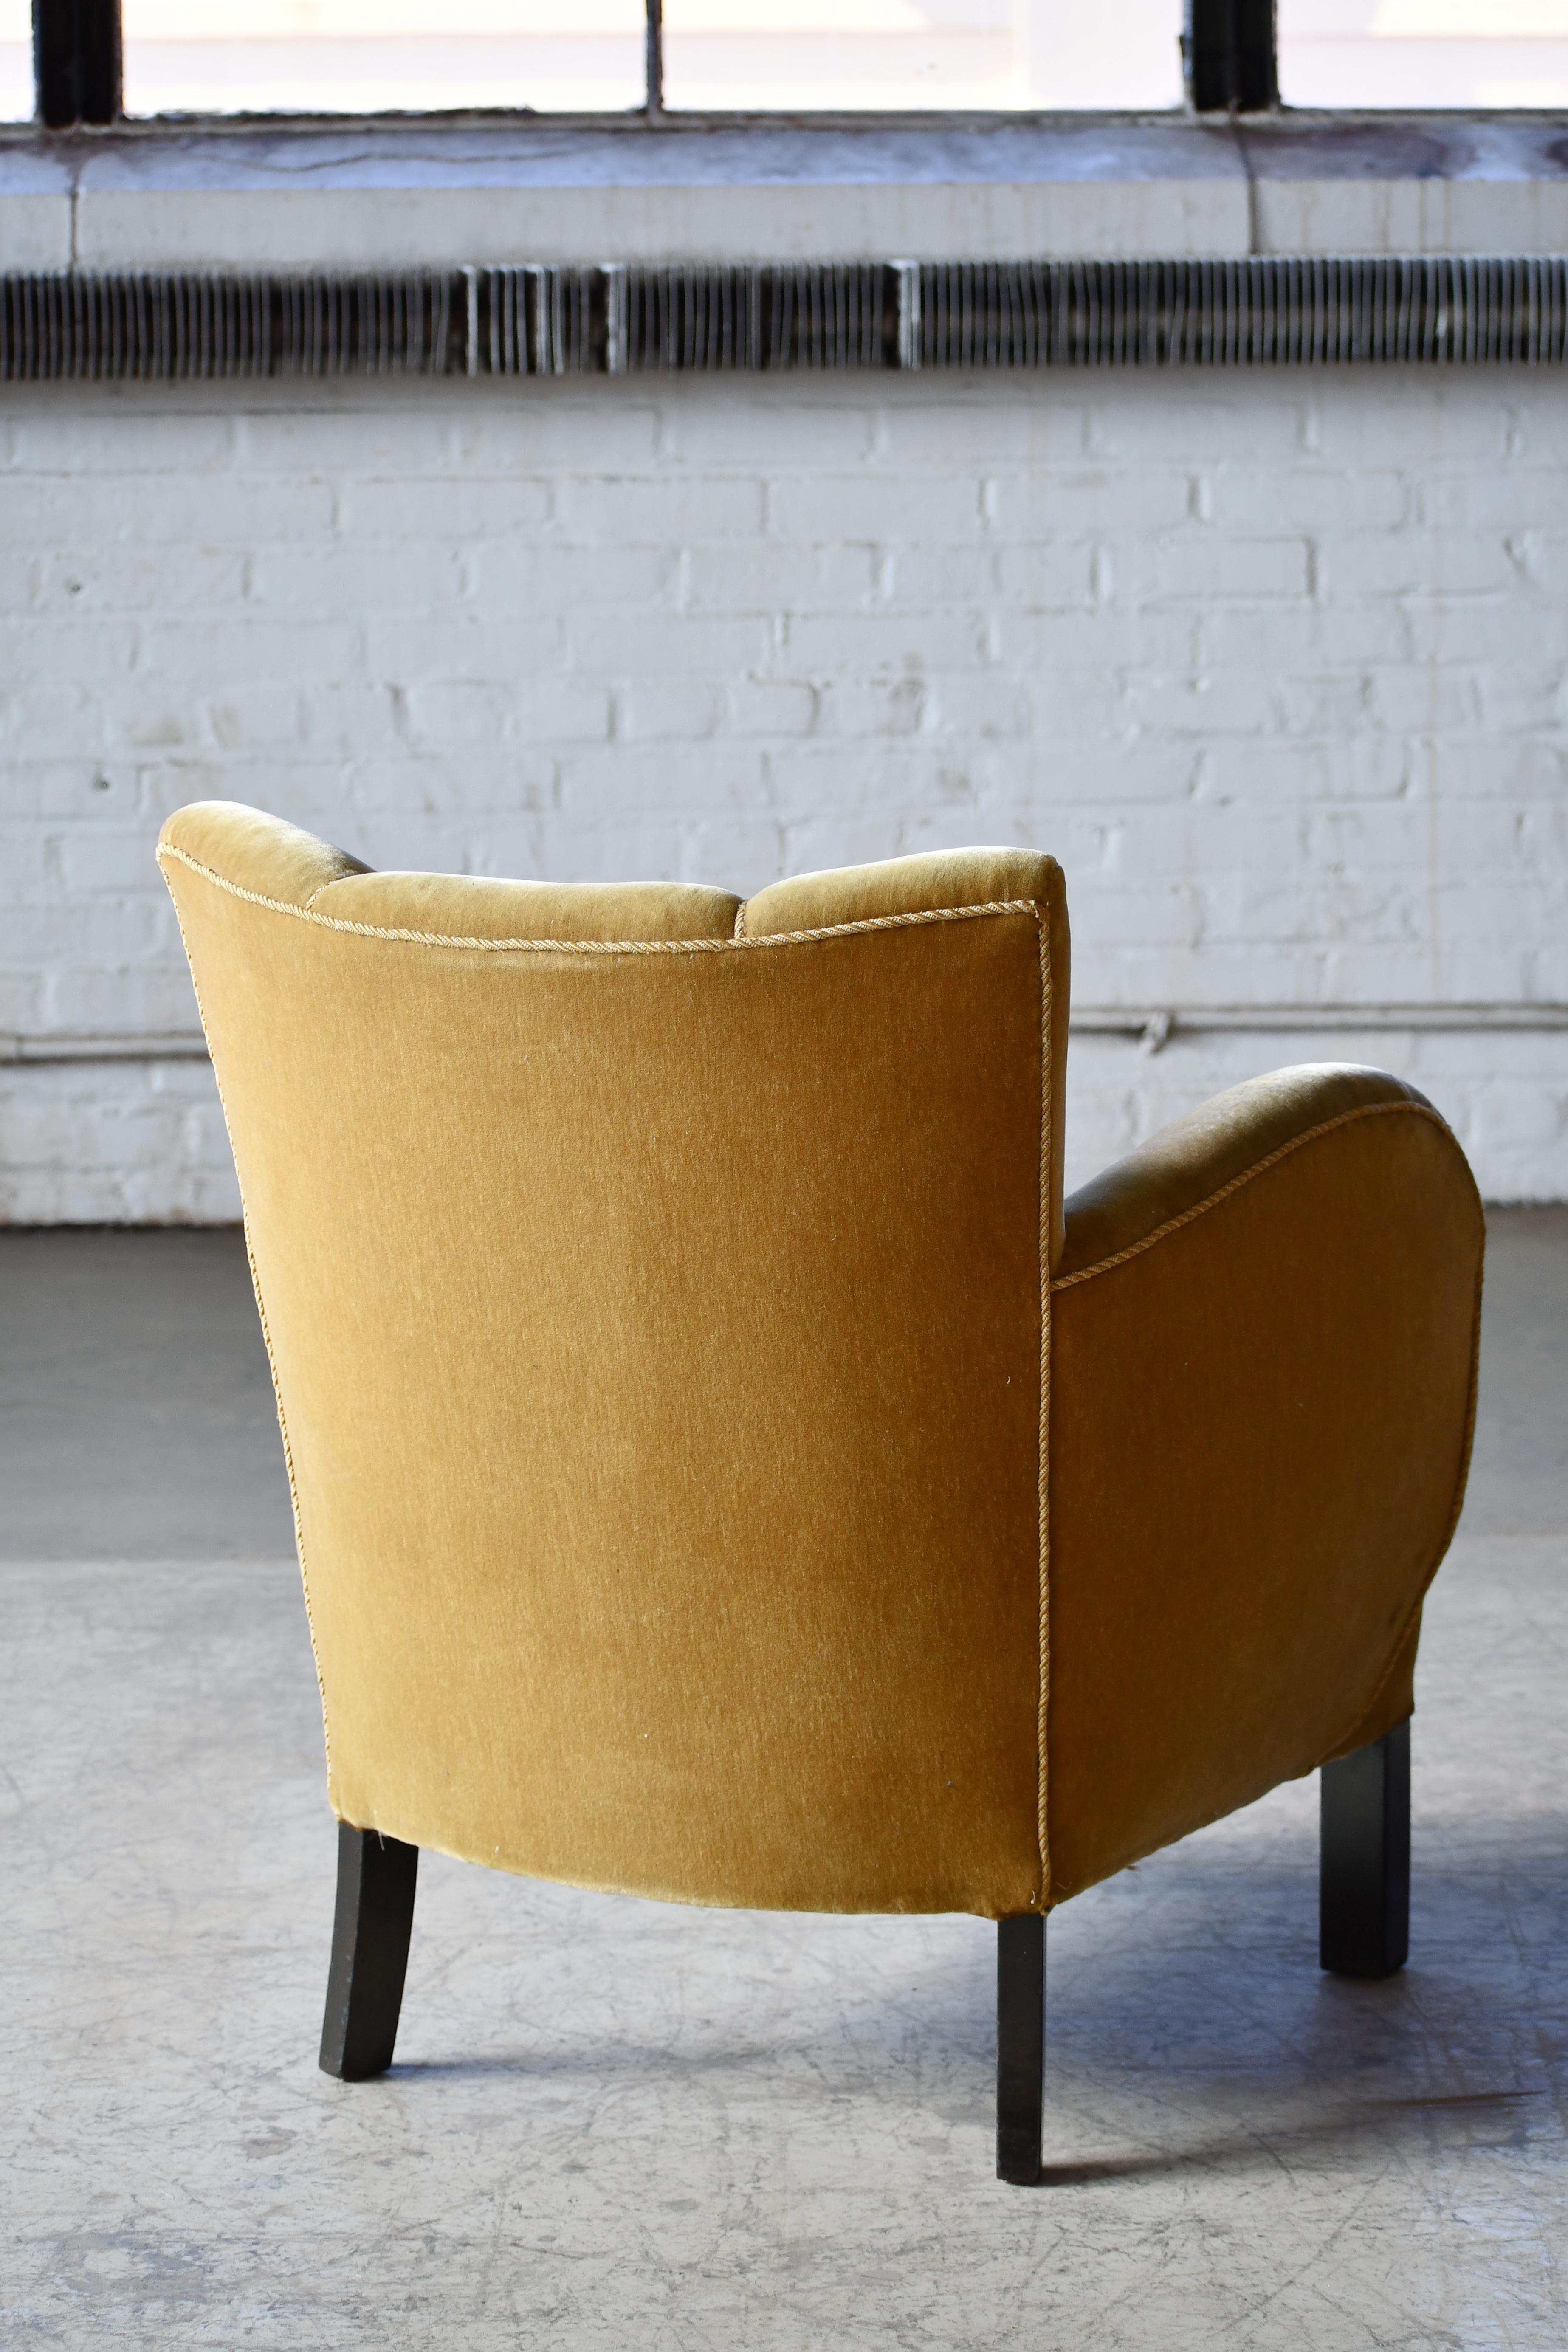 Mohair Danish Early Midcentury or Art Deco Low Lounge Chair 1930-40s (pair available) For Sale